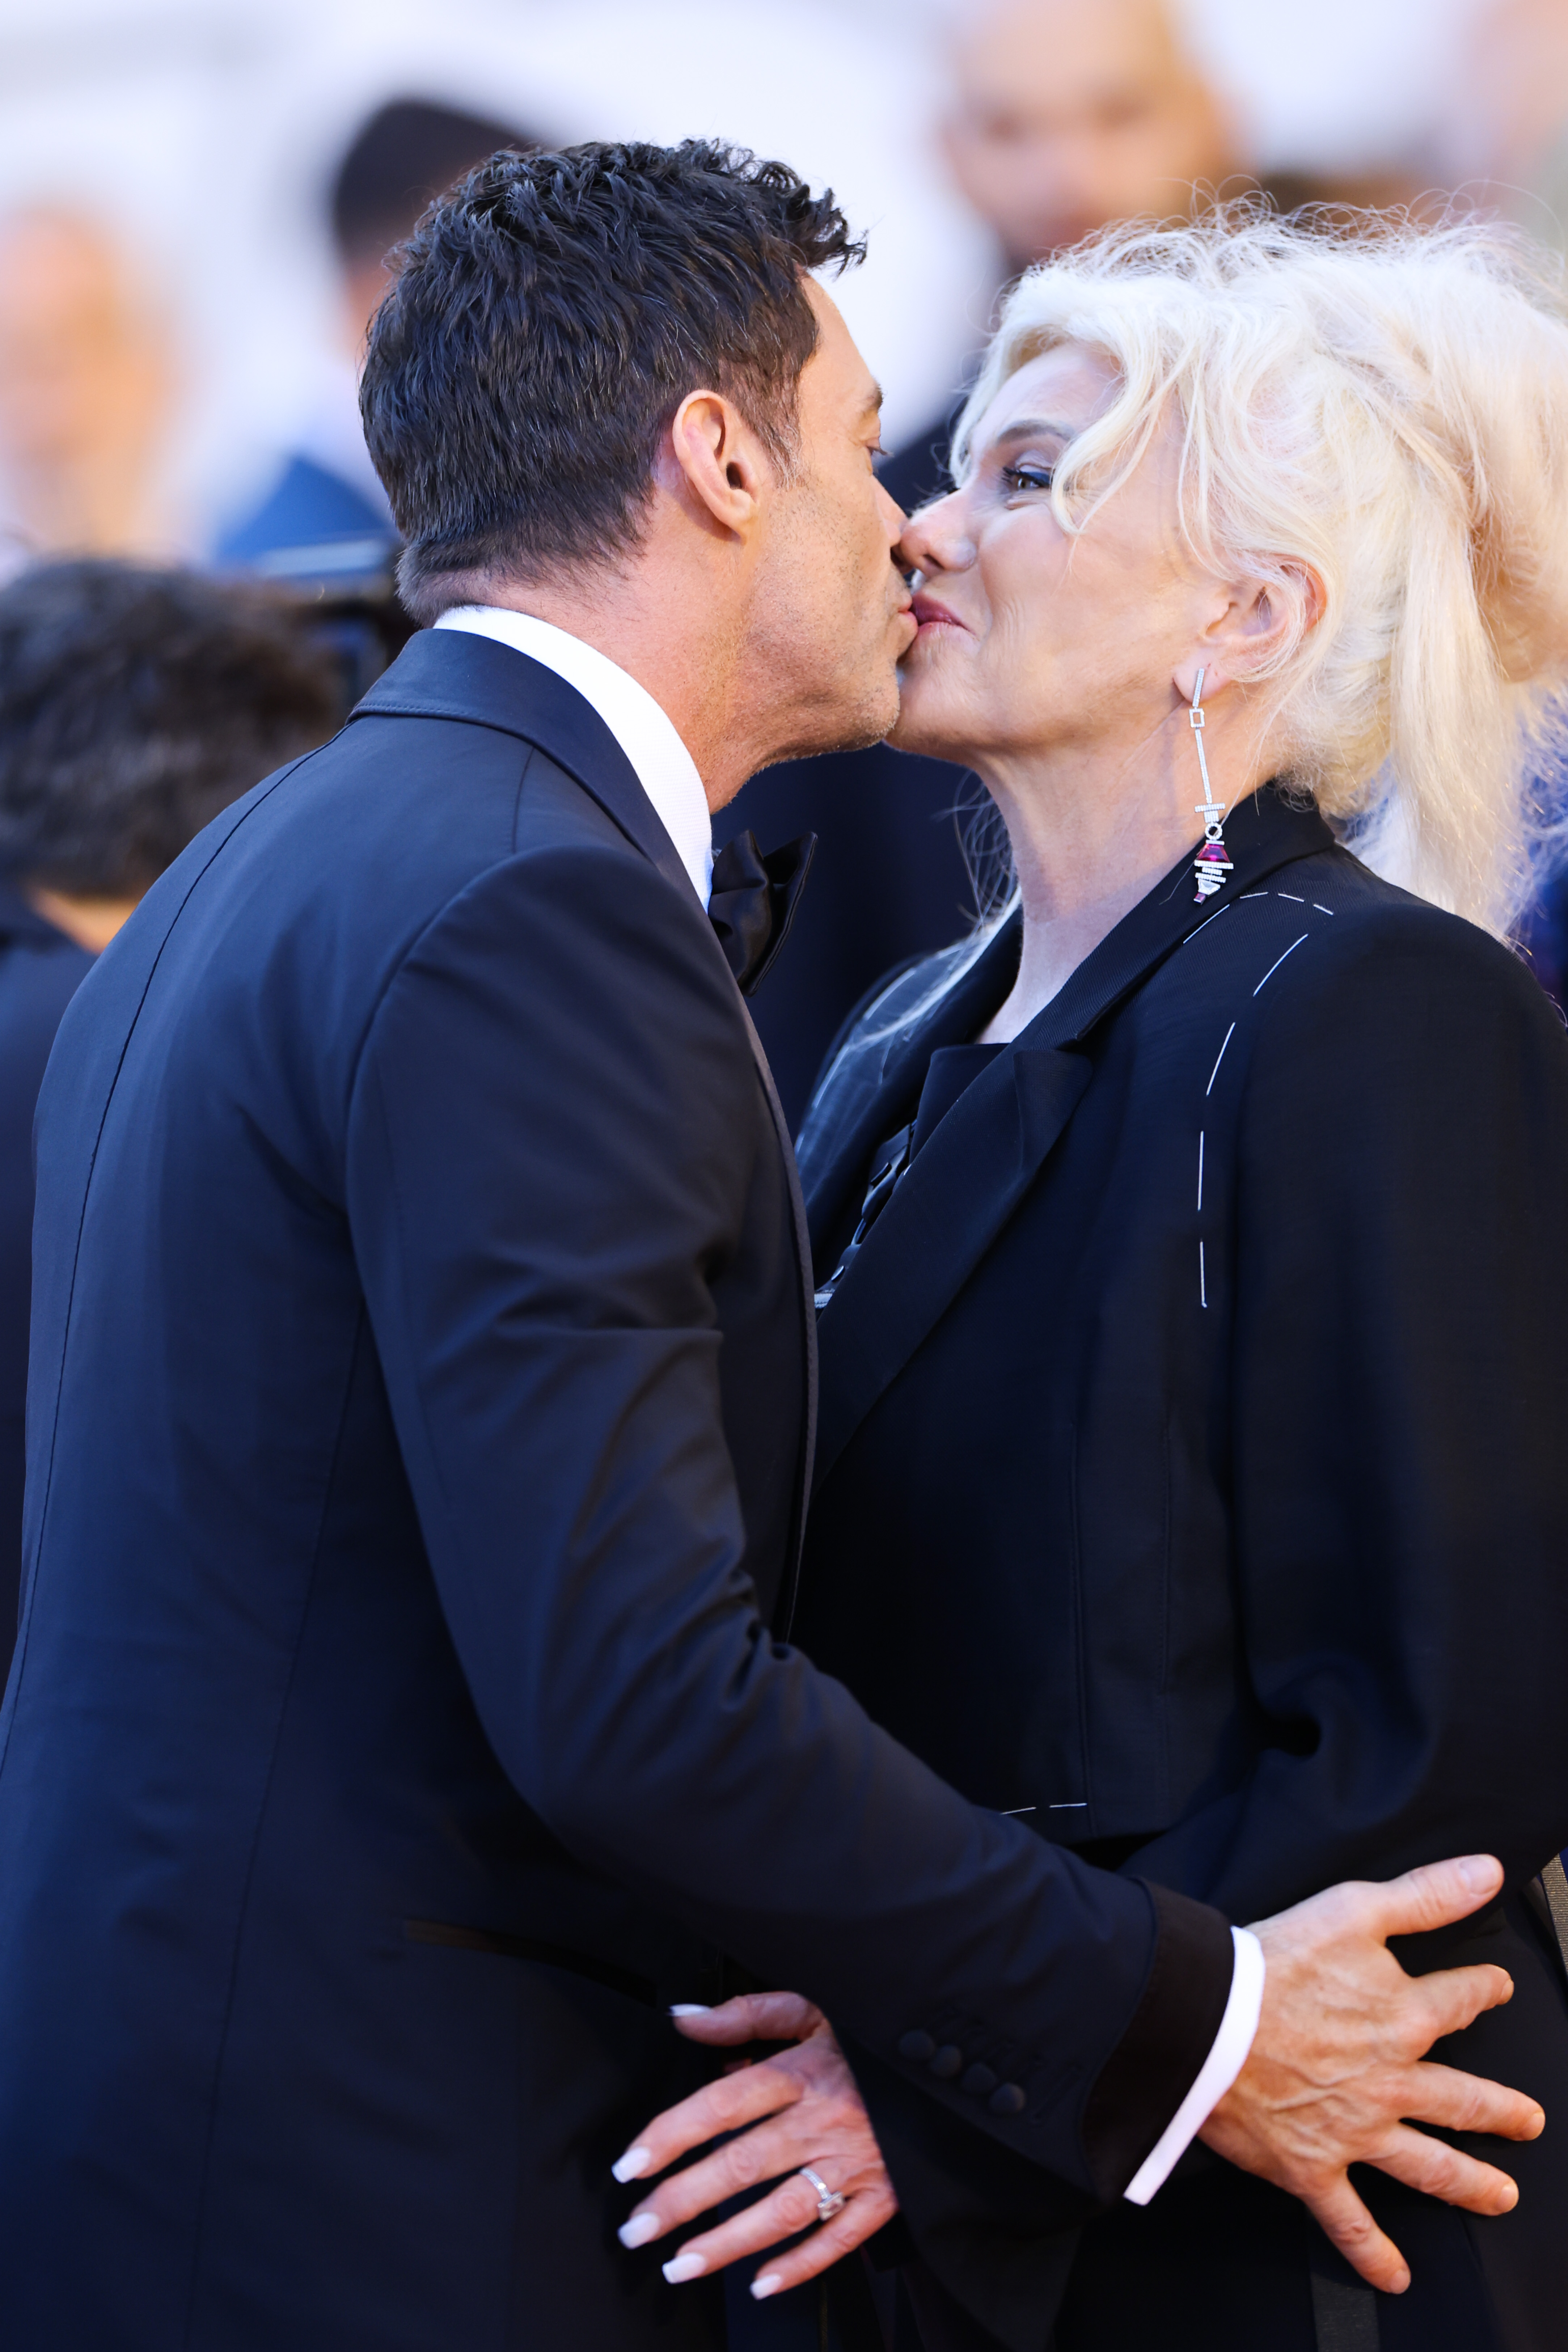 Hugh Jackman and Deborra-Lee Furness share a kiss at the premiere of "The Son" at the 79th Venice International Film Festival in Venice, 2022 | Source: Getty Images